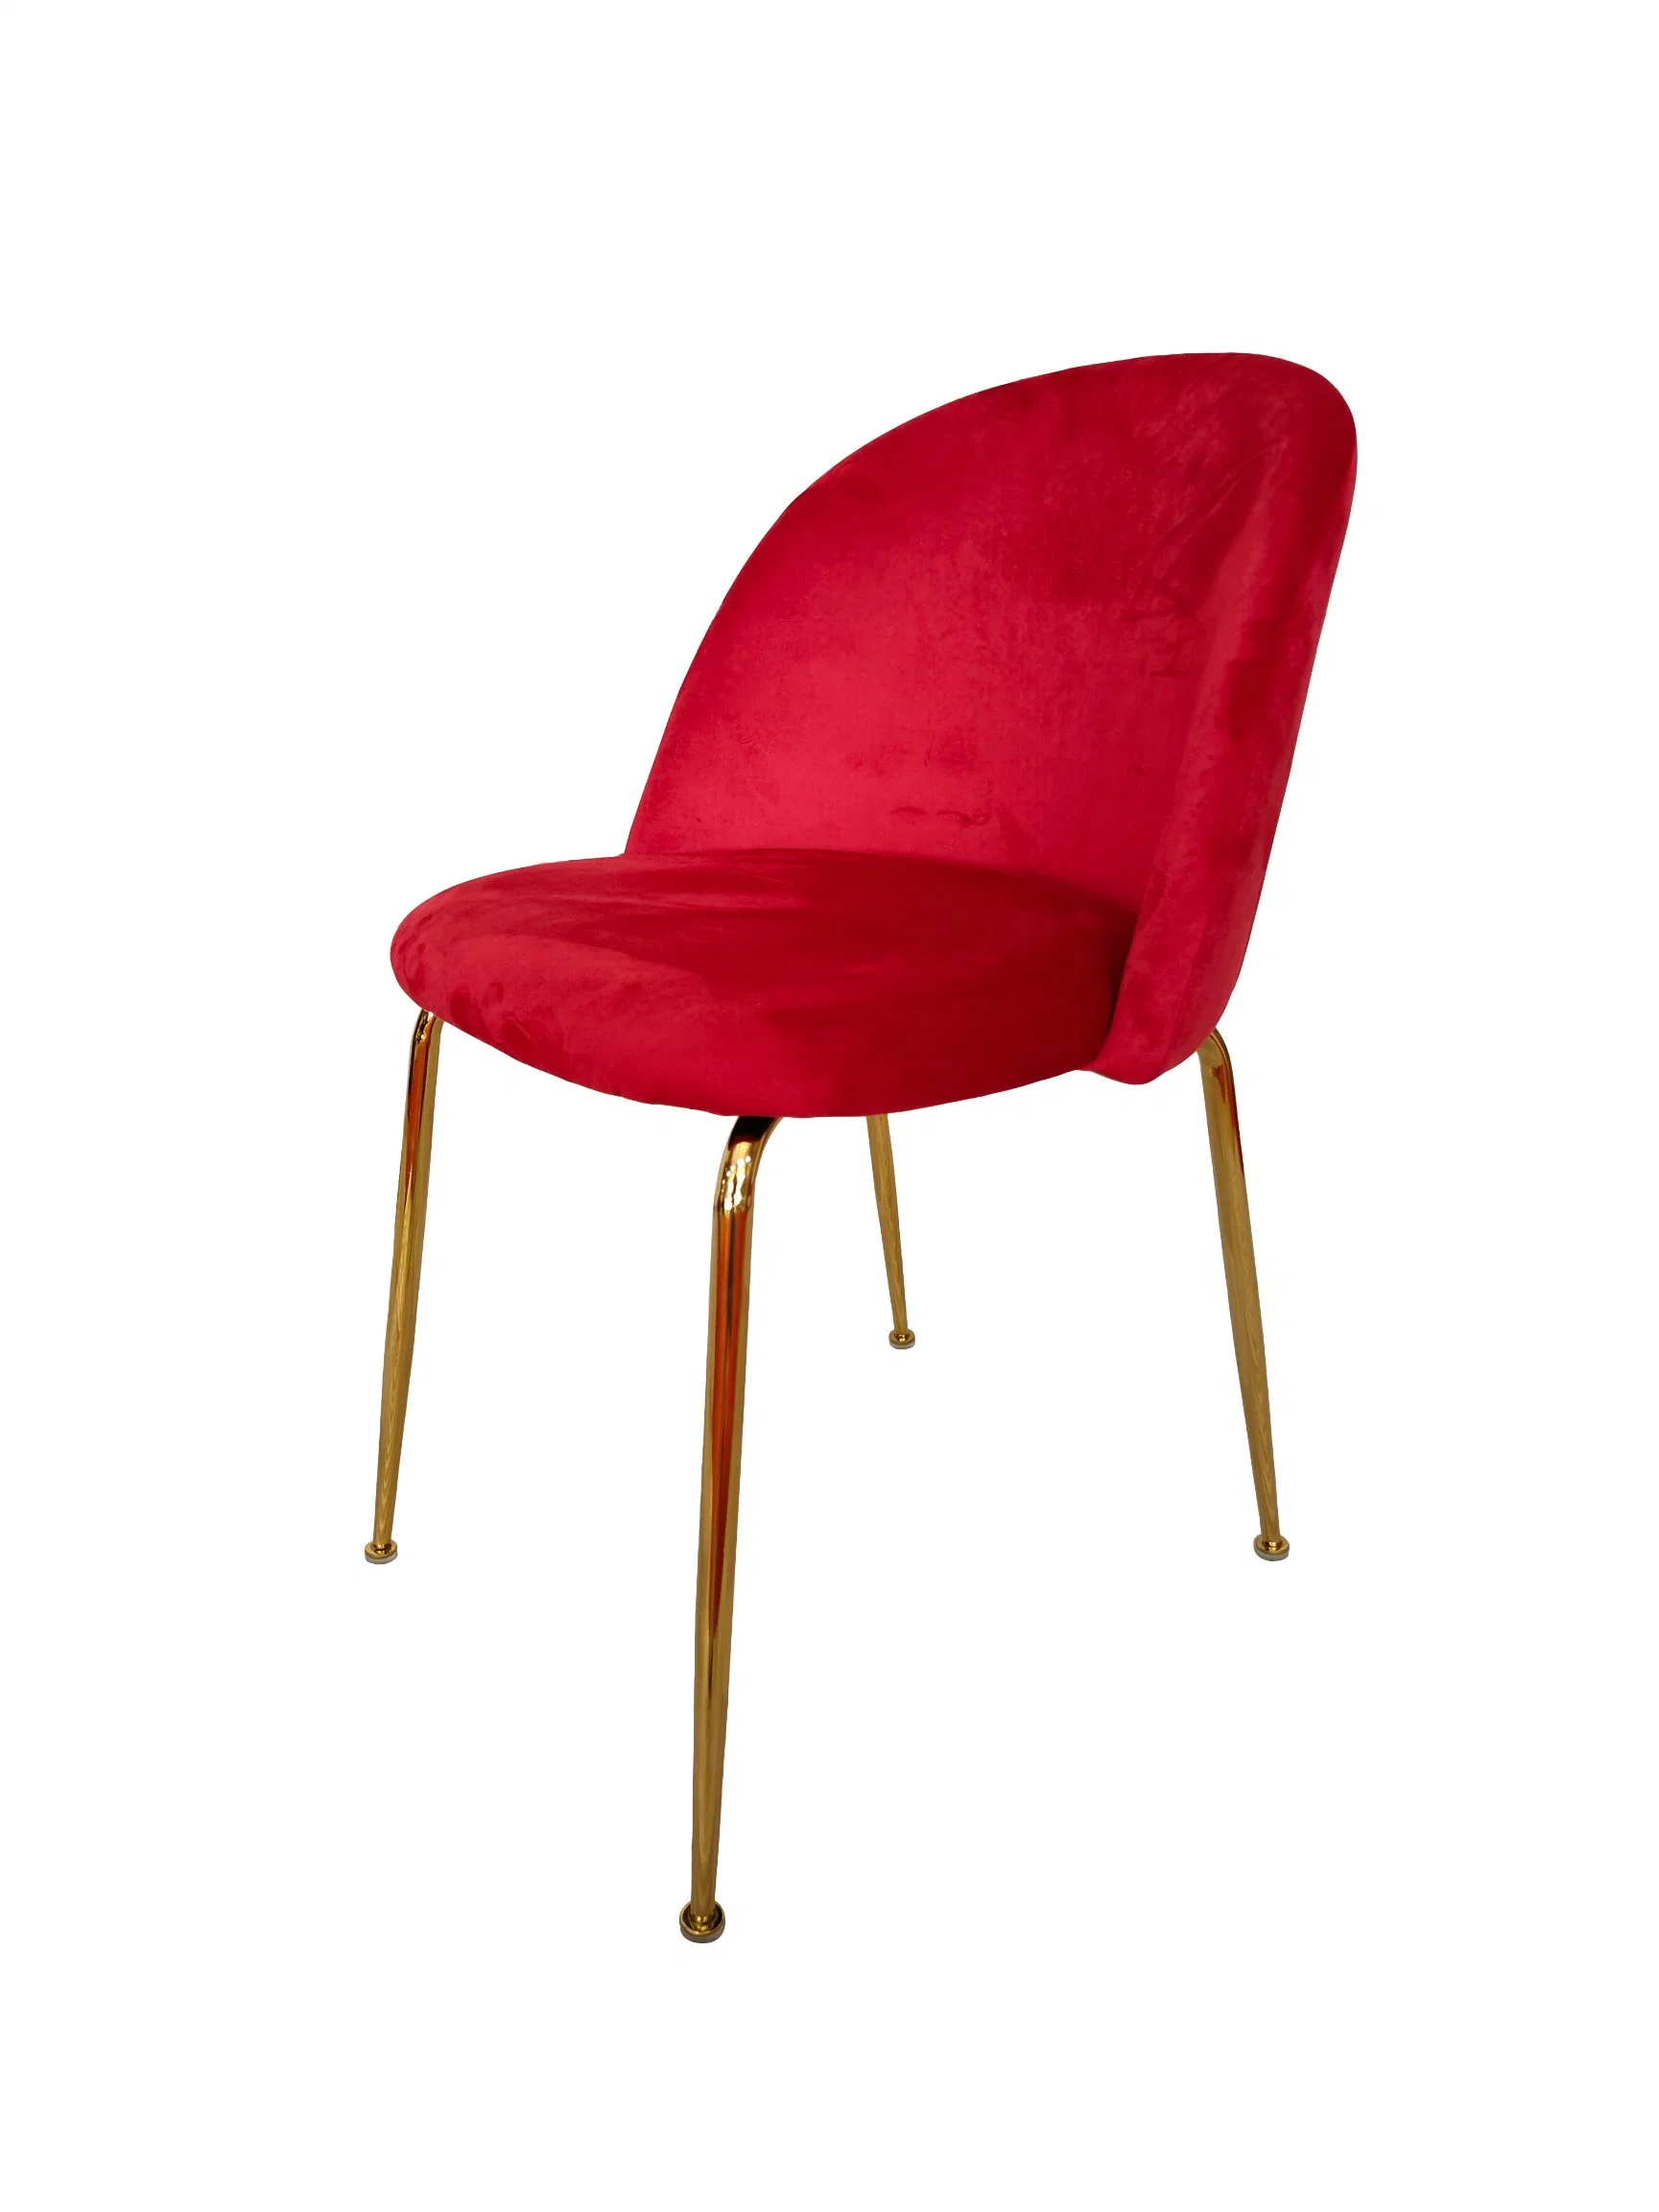 China Wholesale/Supplier Modern Style Room/Restaurant/Hall Furniture Nordic Metal Leg Fabric Upholstered Red/White Velvet Dining Chair Price for Nordic Design